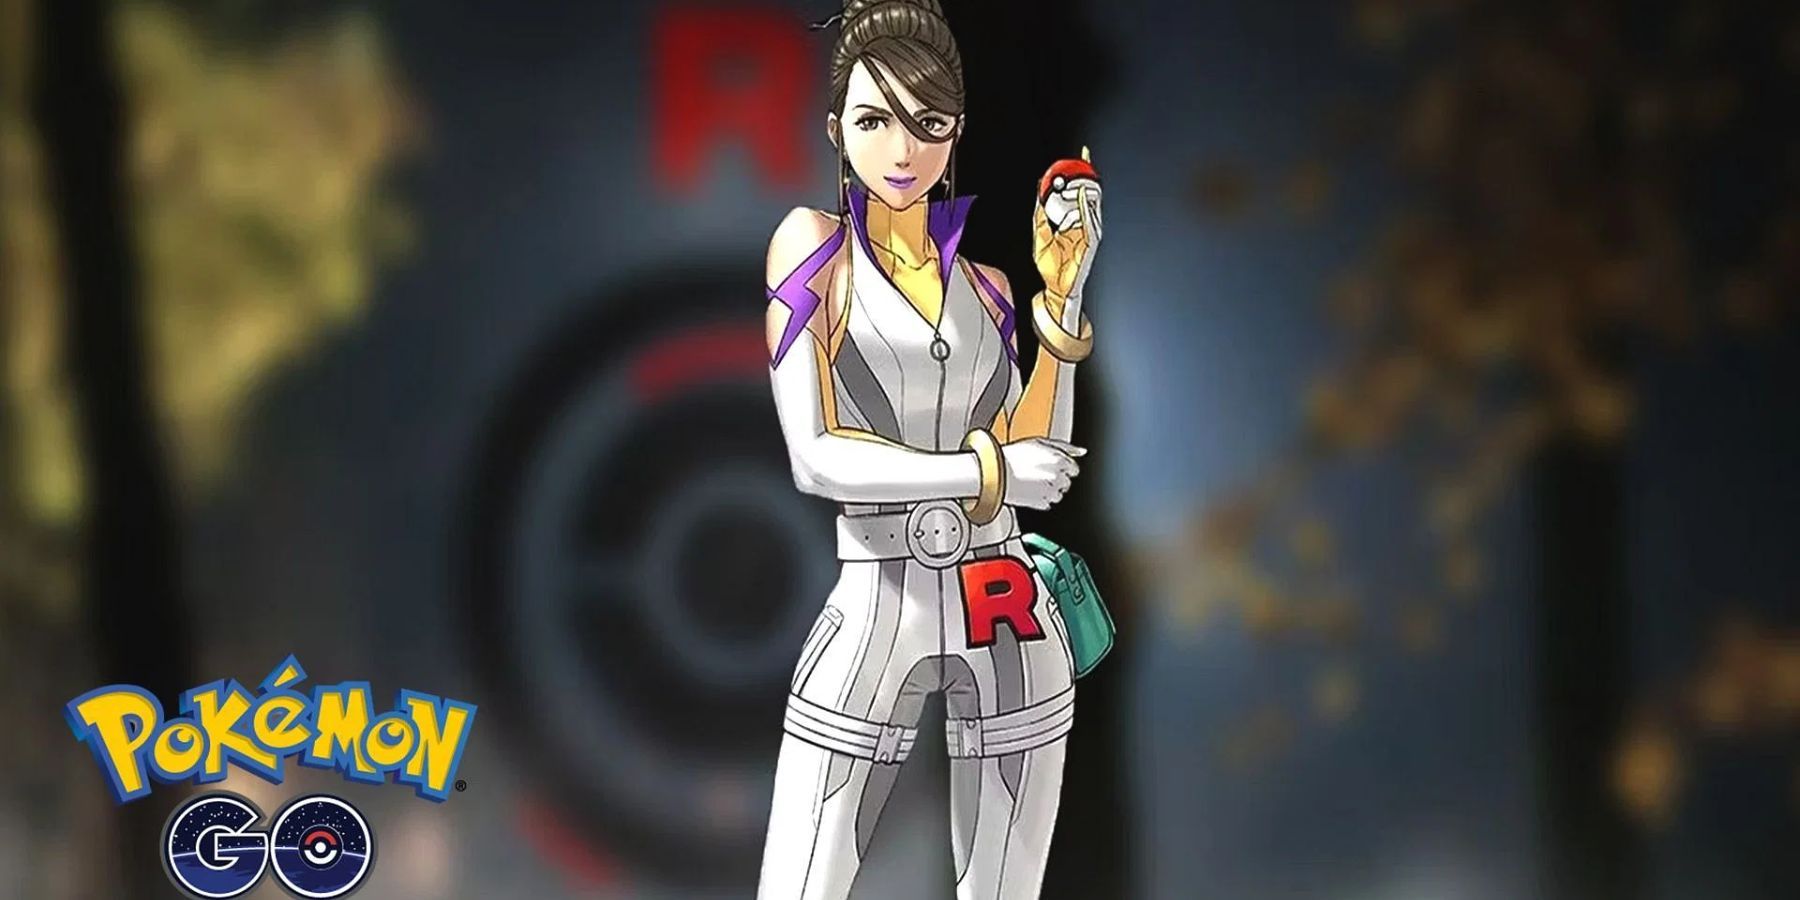 Team Rocket leader Sierra stands with a Pokeball in her hand, posing confidently